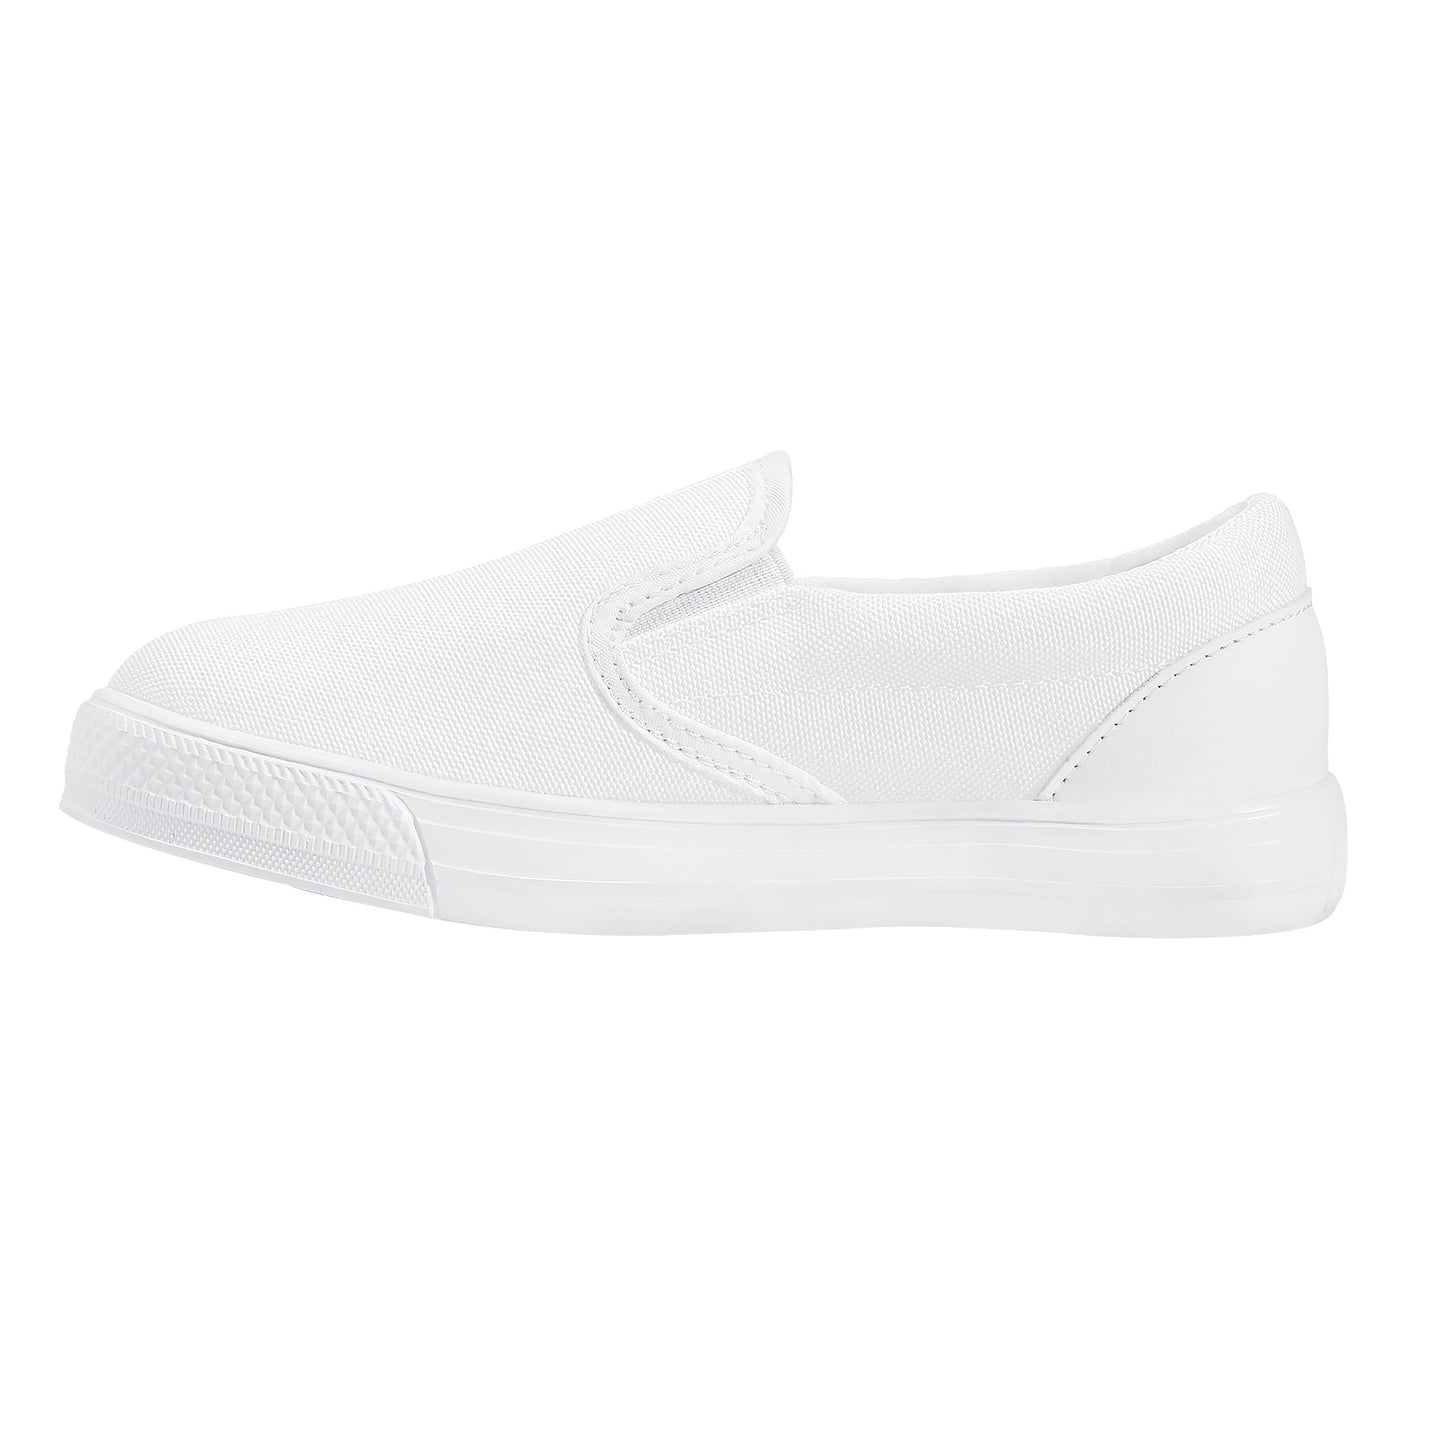 Create Your Own Kids Slip On Shoes -White